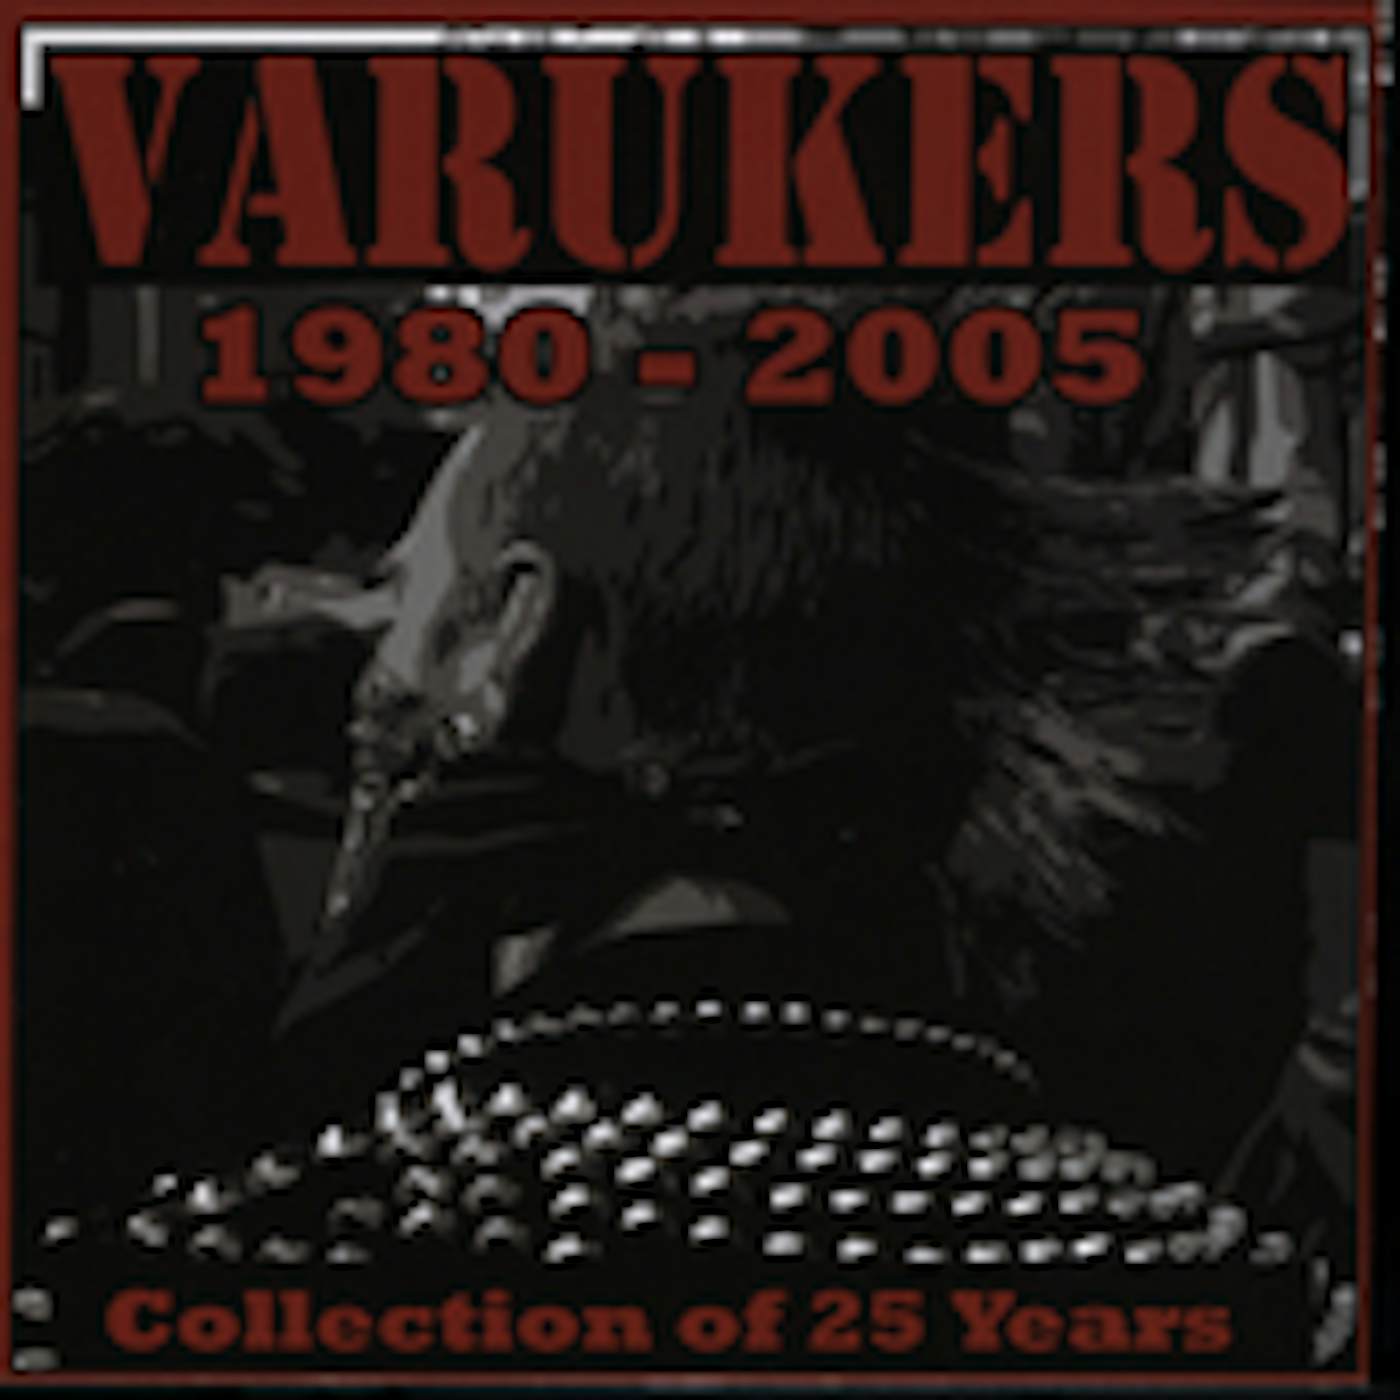 The Varukers 1980-2005 COLLECTION OF 25 YEARS CD